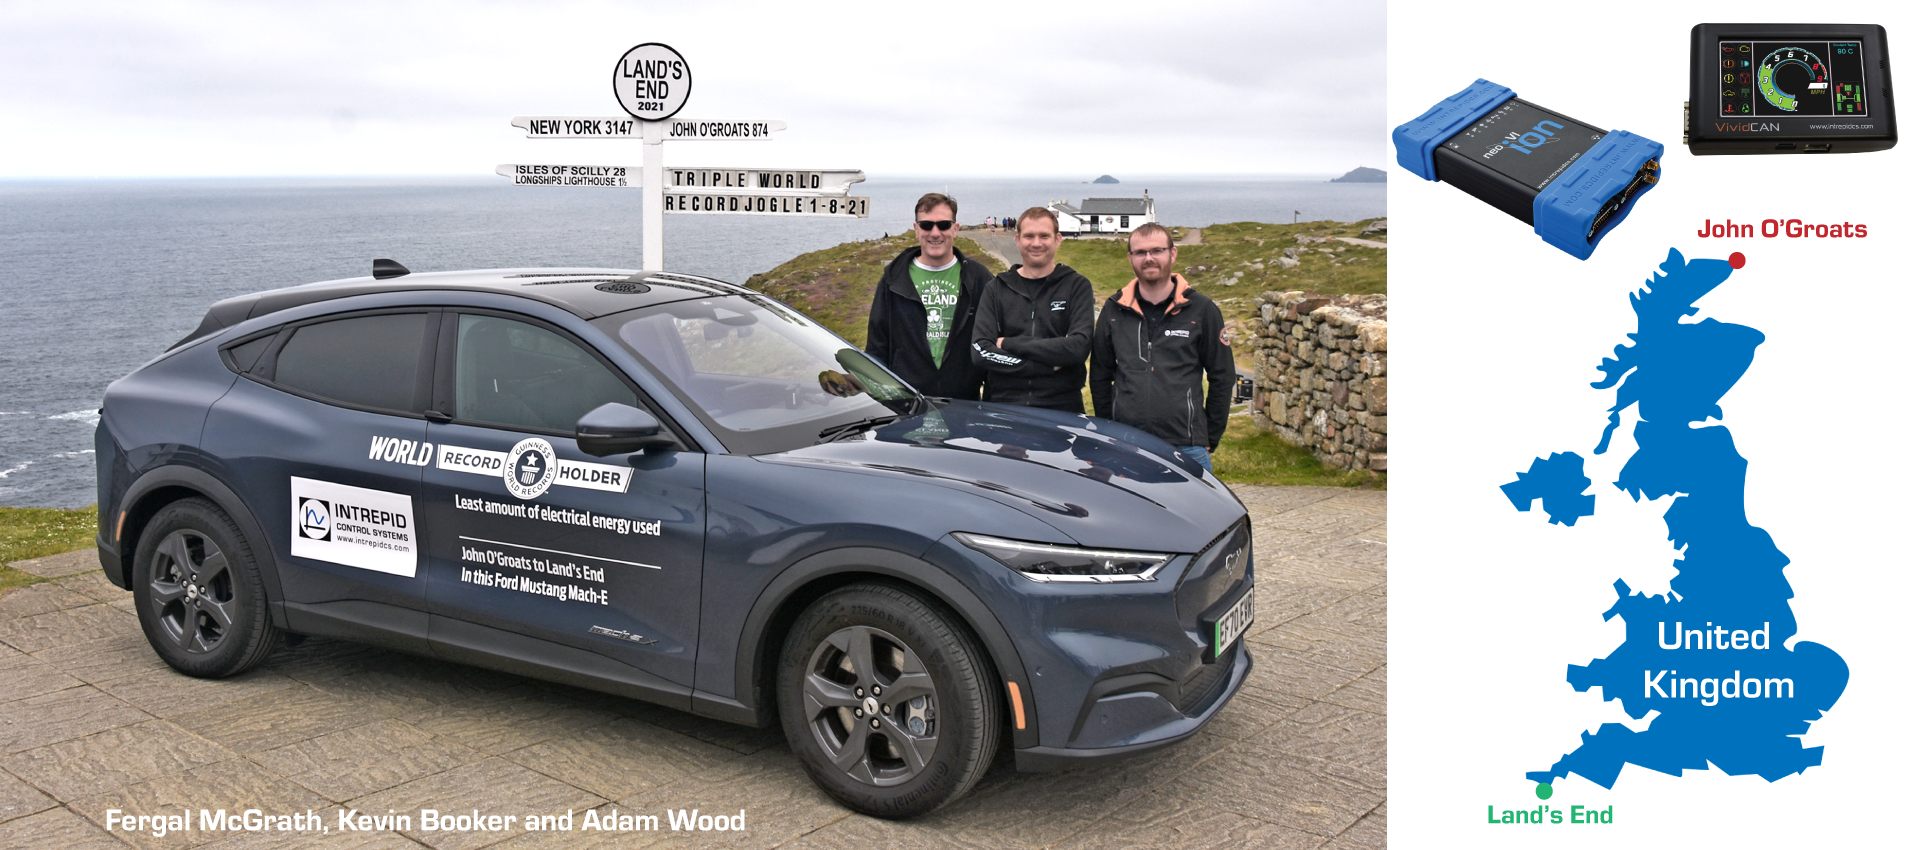 Intrepid Control Systems UK Support in Electric Vehicle Triple World Record Achievement